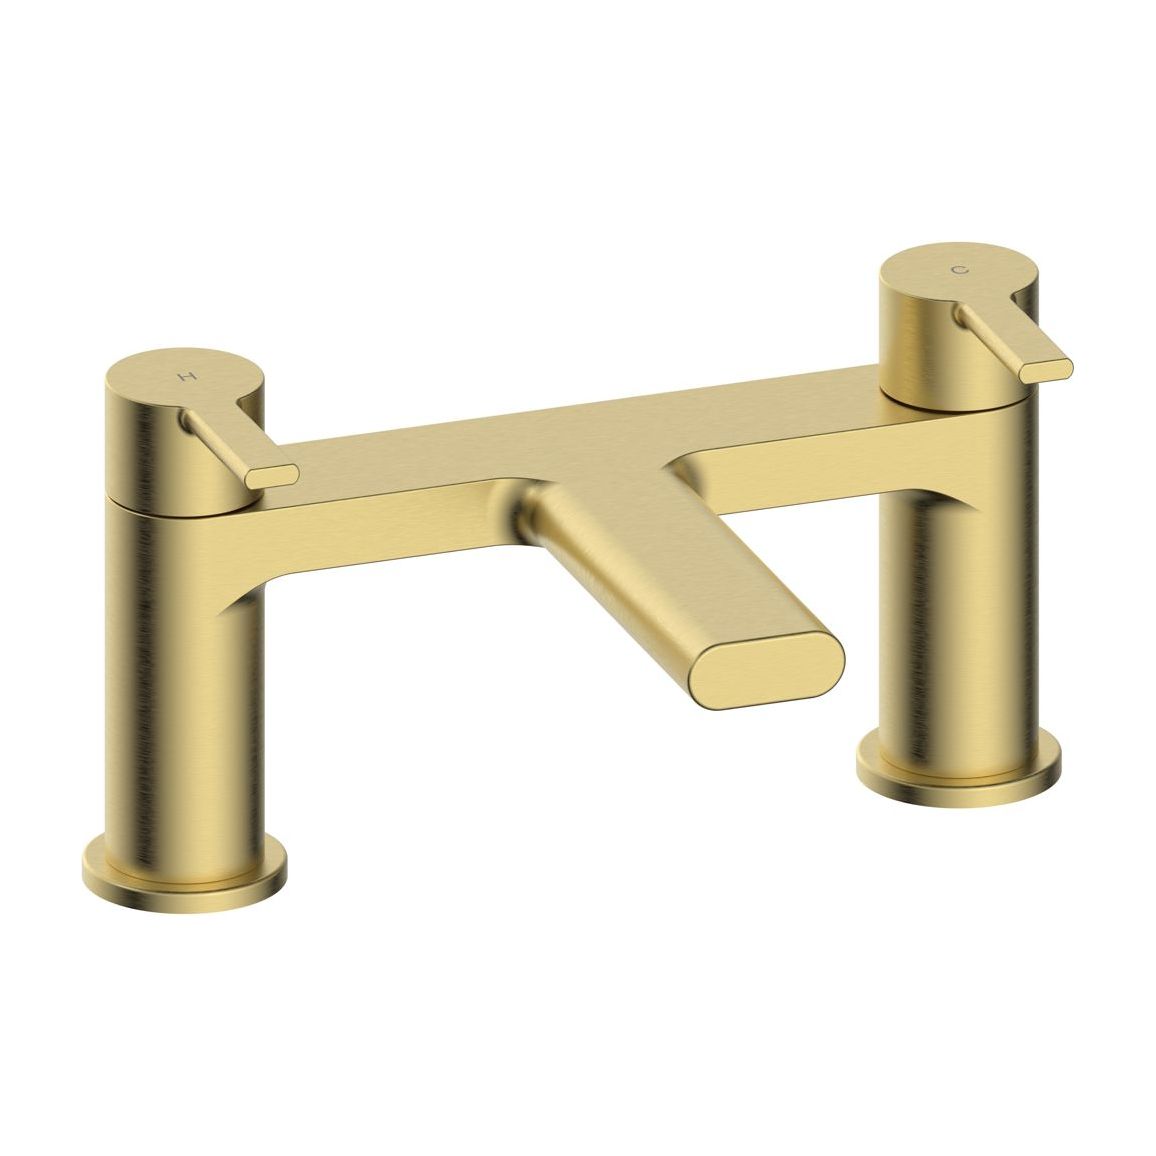 Floyer Full Suite & Bath w/Brushed Brass Finishes